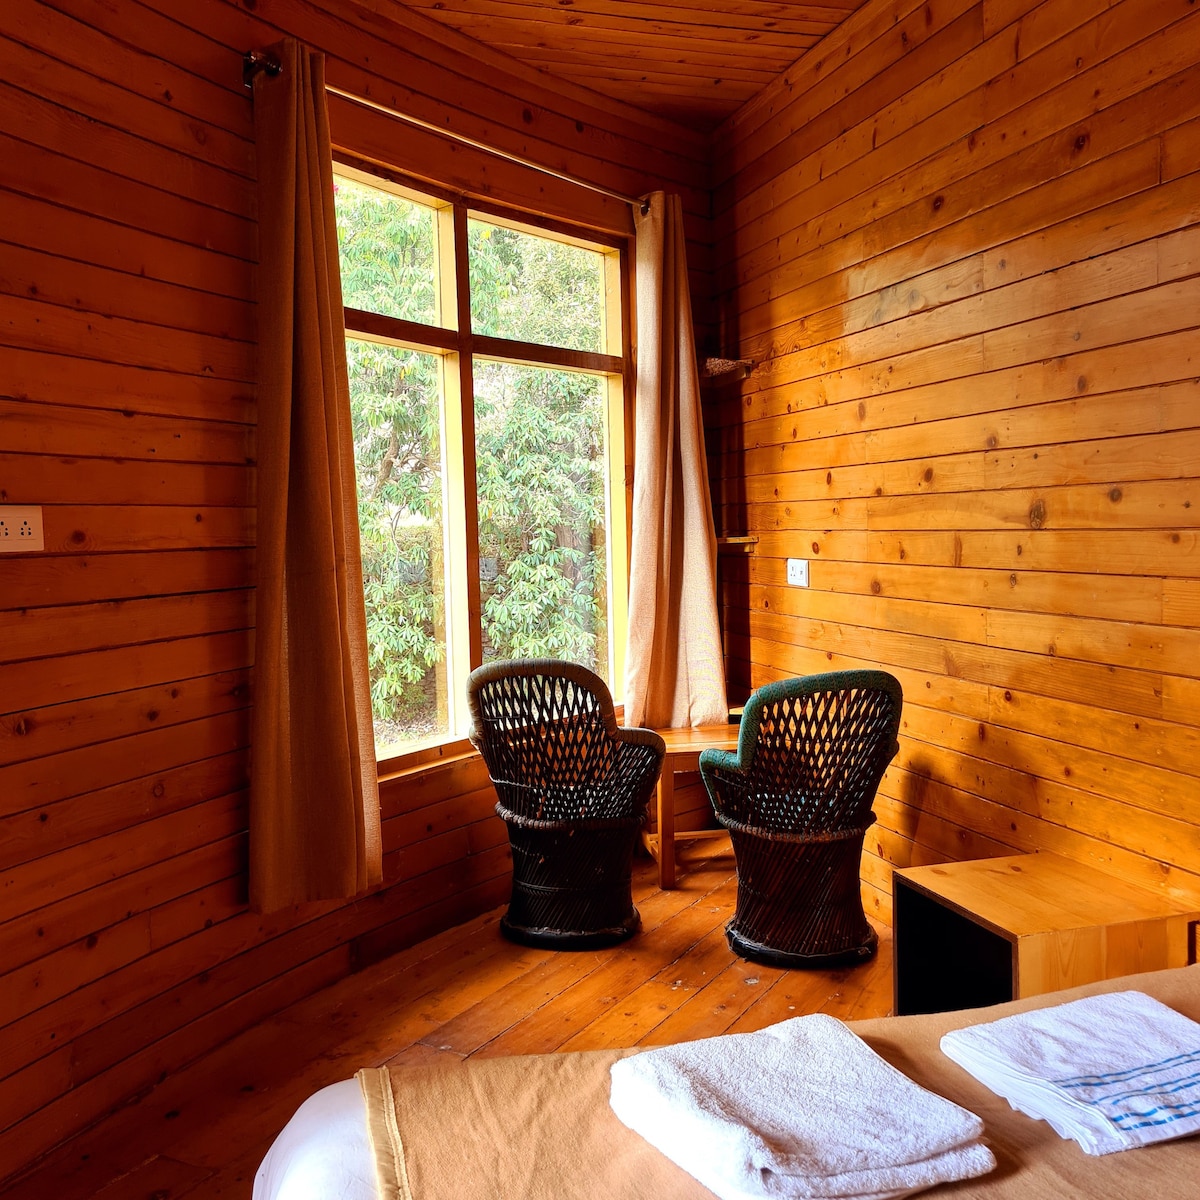 Wooden room with nature view at 6900ft.